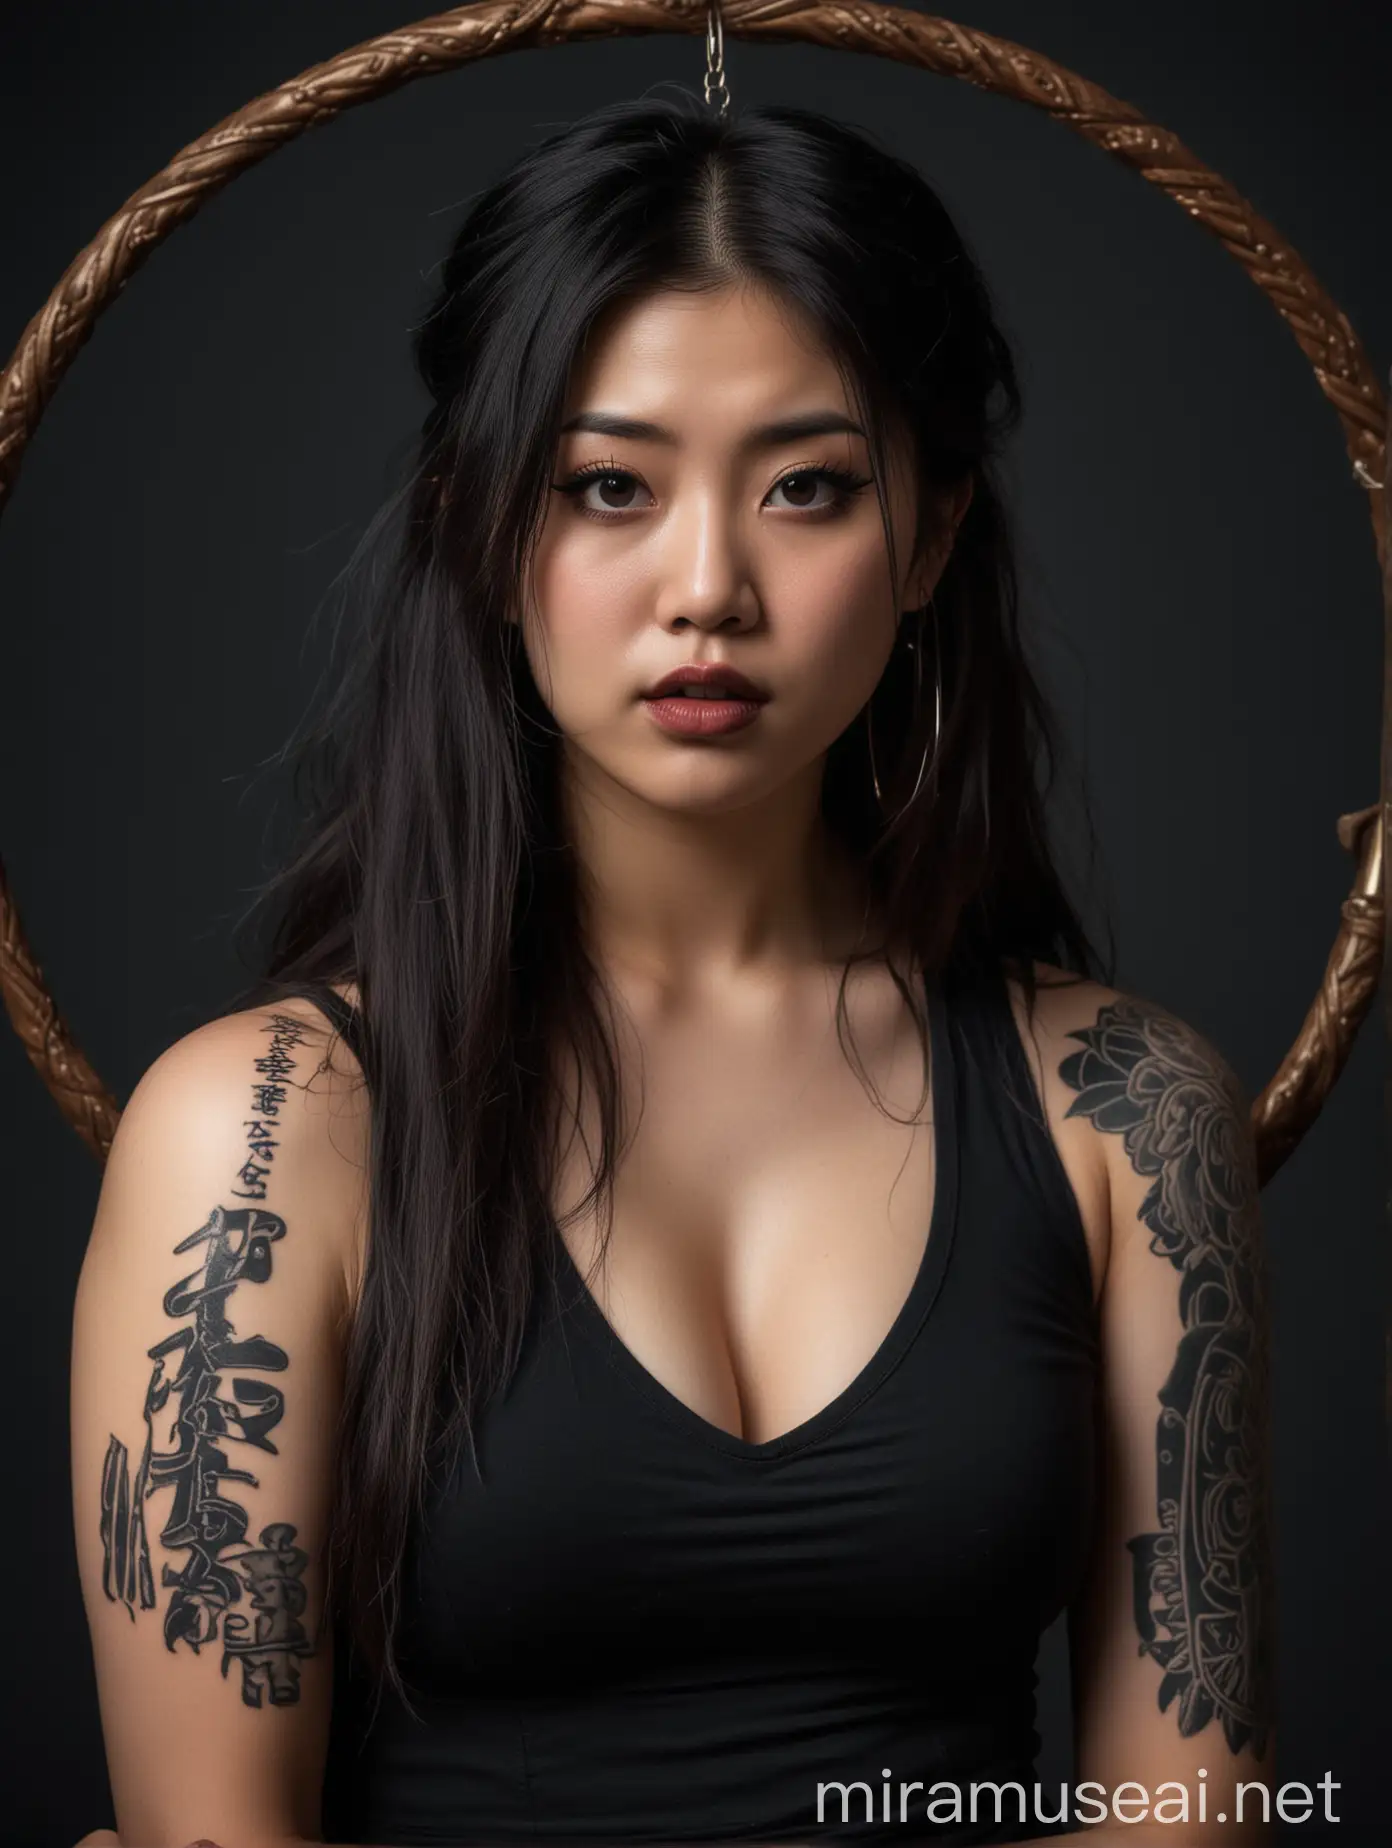 Realistic Photo, Renaissance pose, Japanese woman,long hair, mean, shinning light, chubby, tattoos, hoop earrings, black tank top, BLACK lipstick,  TATTOOS, angry expression, dark background,